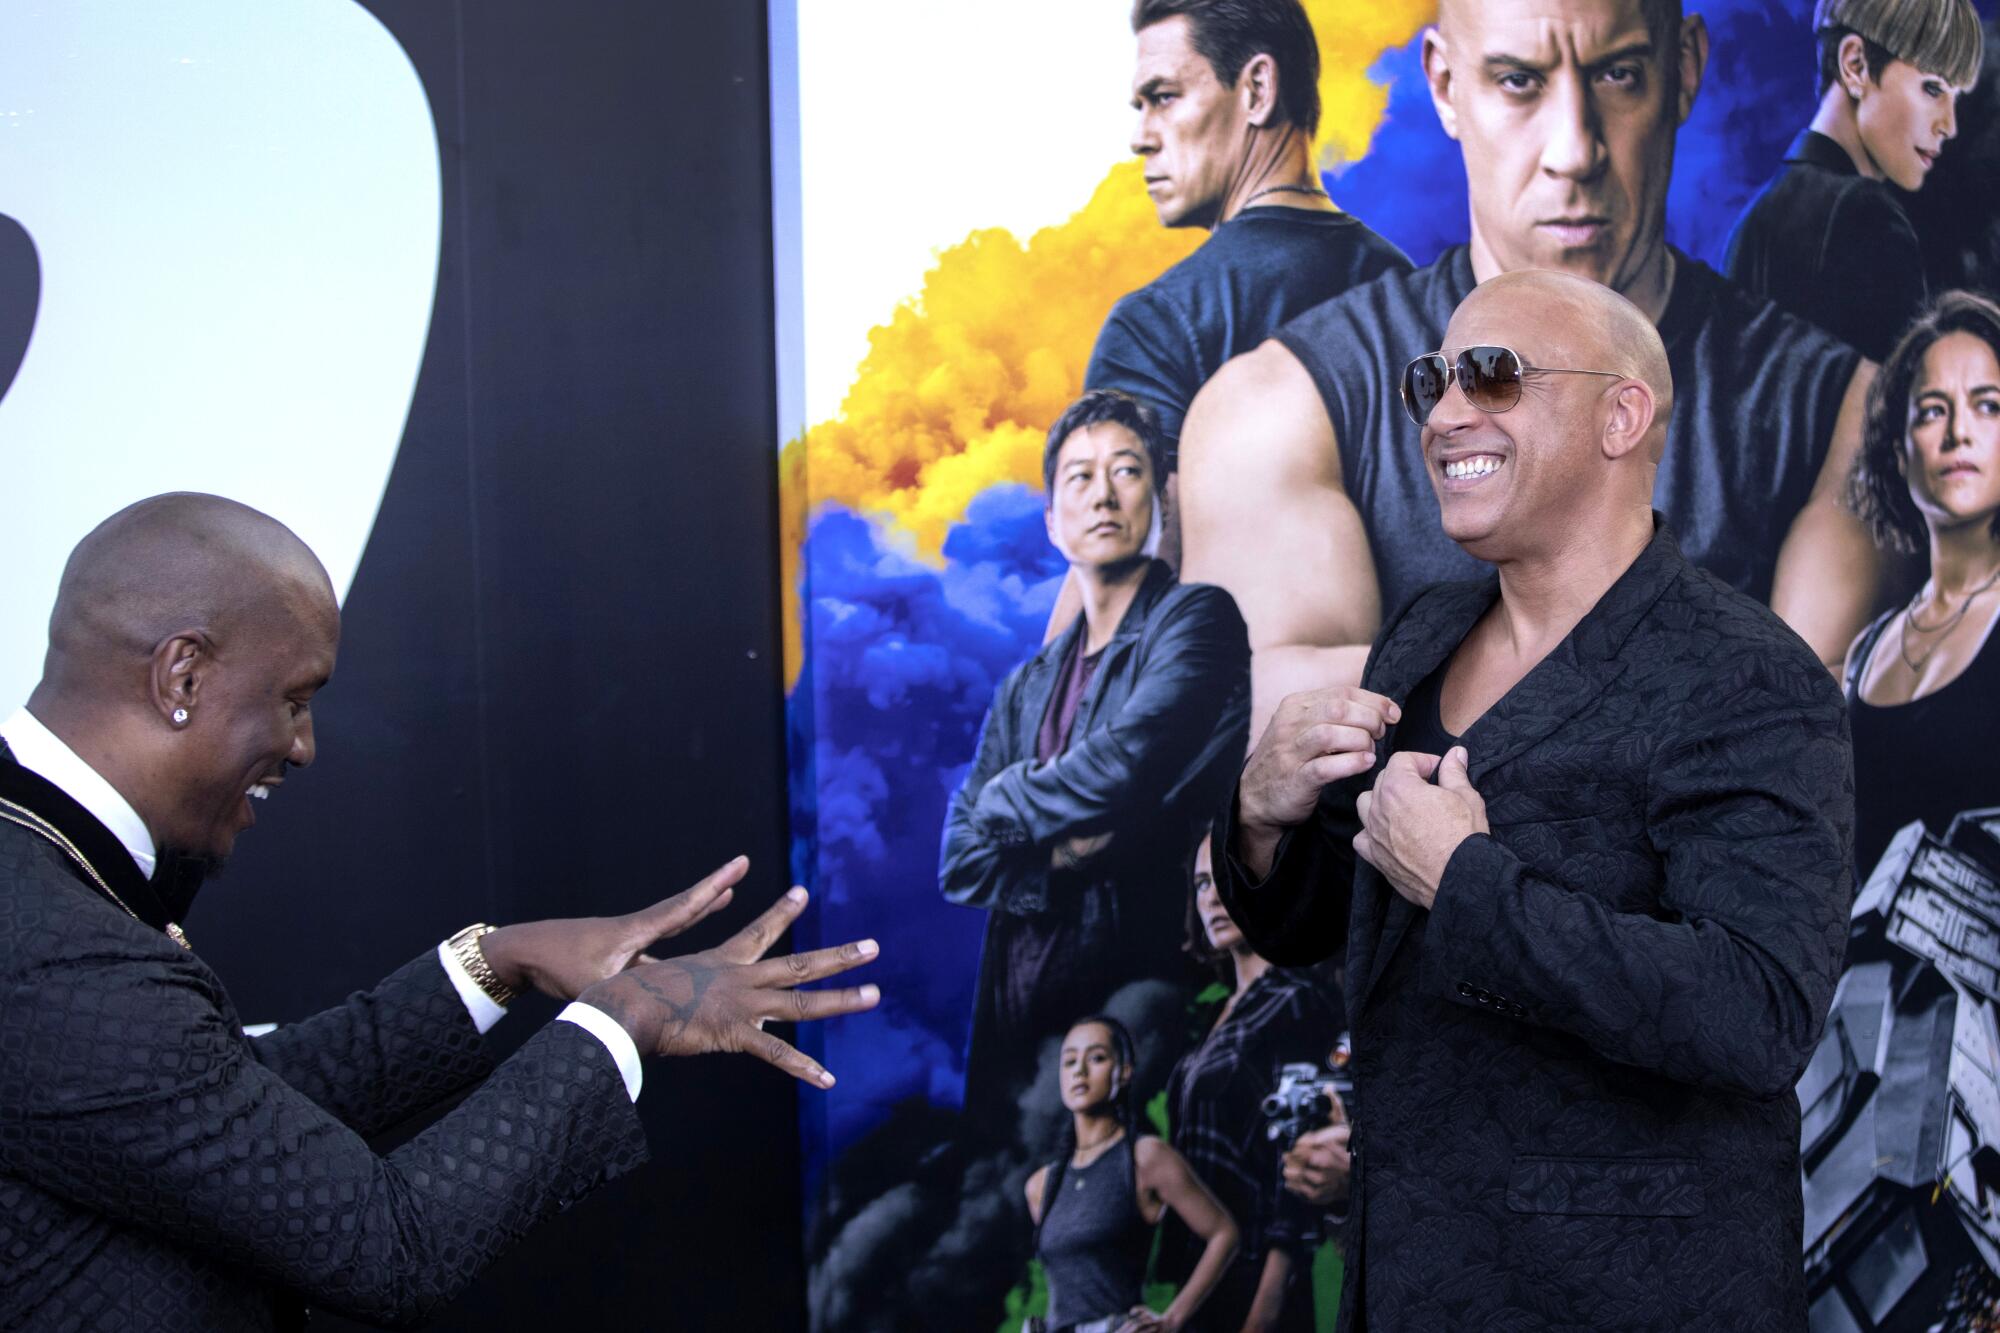 Tyrese Gibson and Vin Diesel joke around at the "F9" premiere